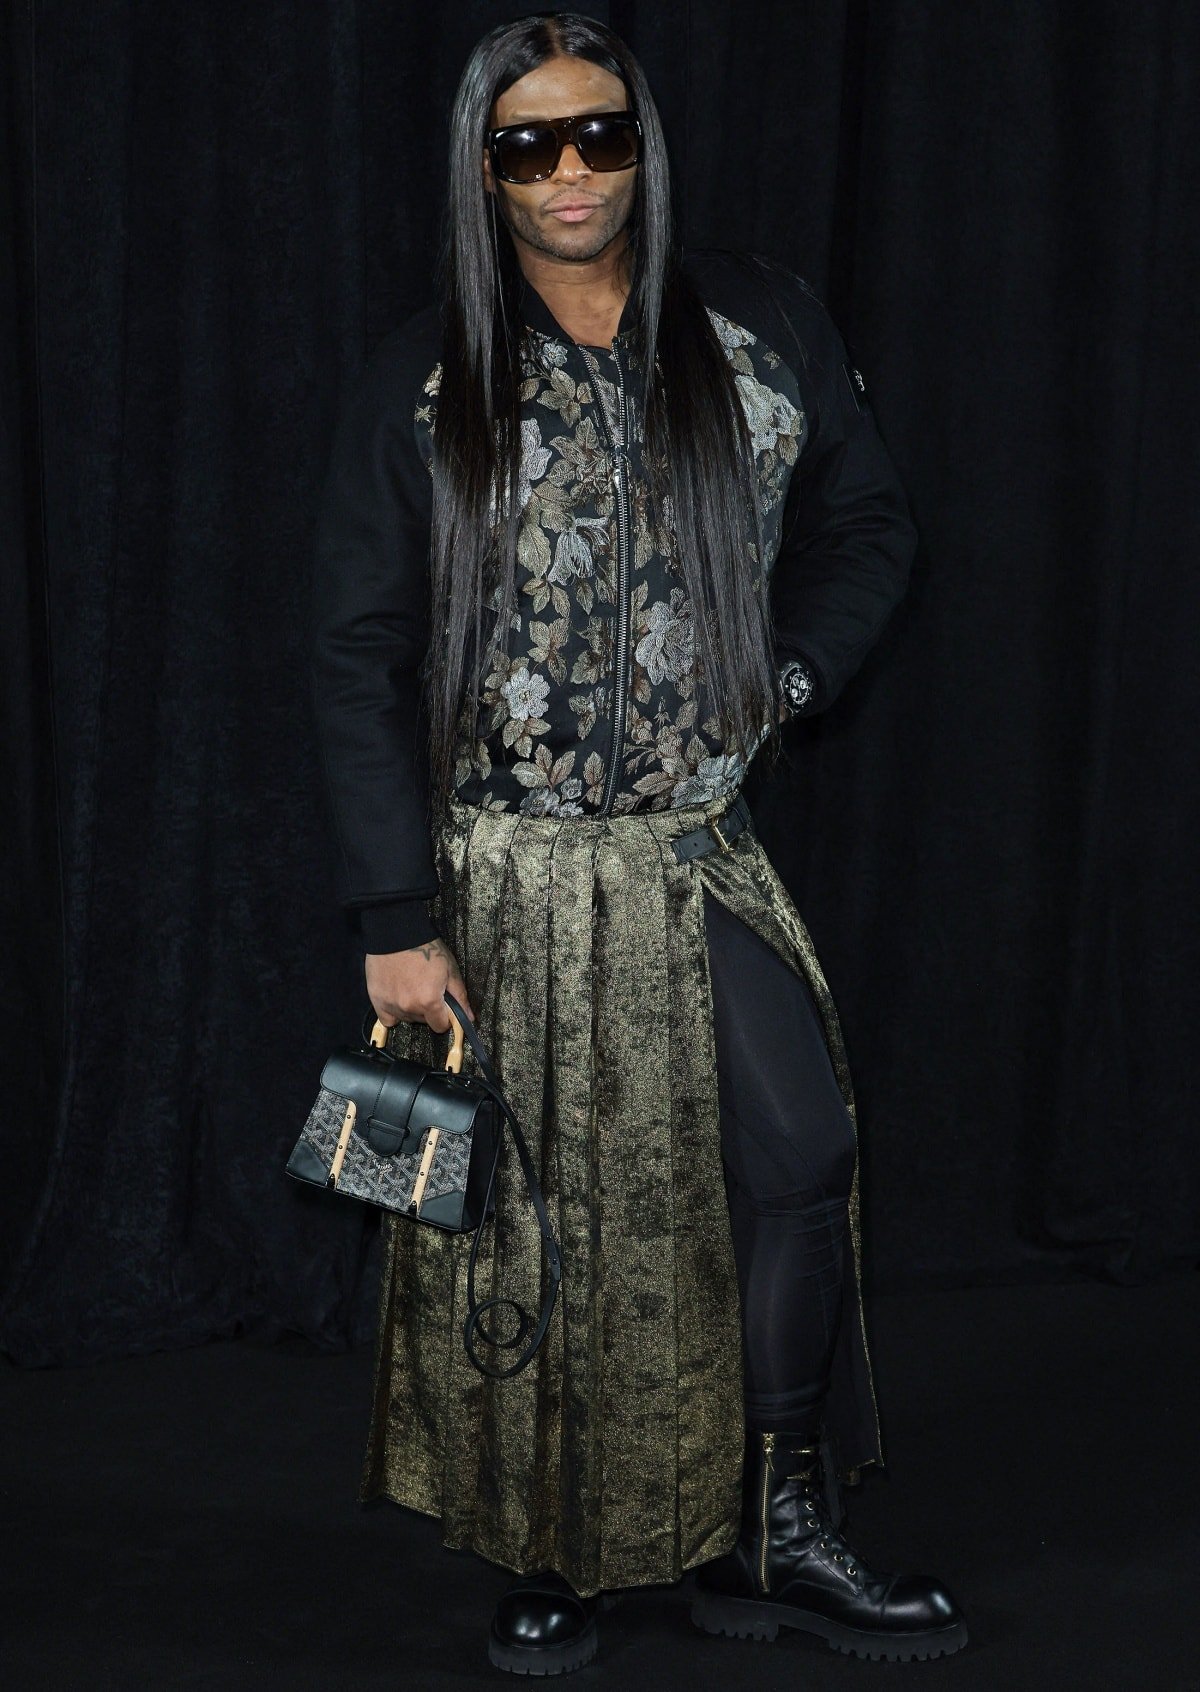 Law Roach attending the Roberto Cavalli Spring/Summer 2023 show during Milan Fashion Week